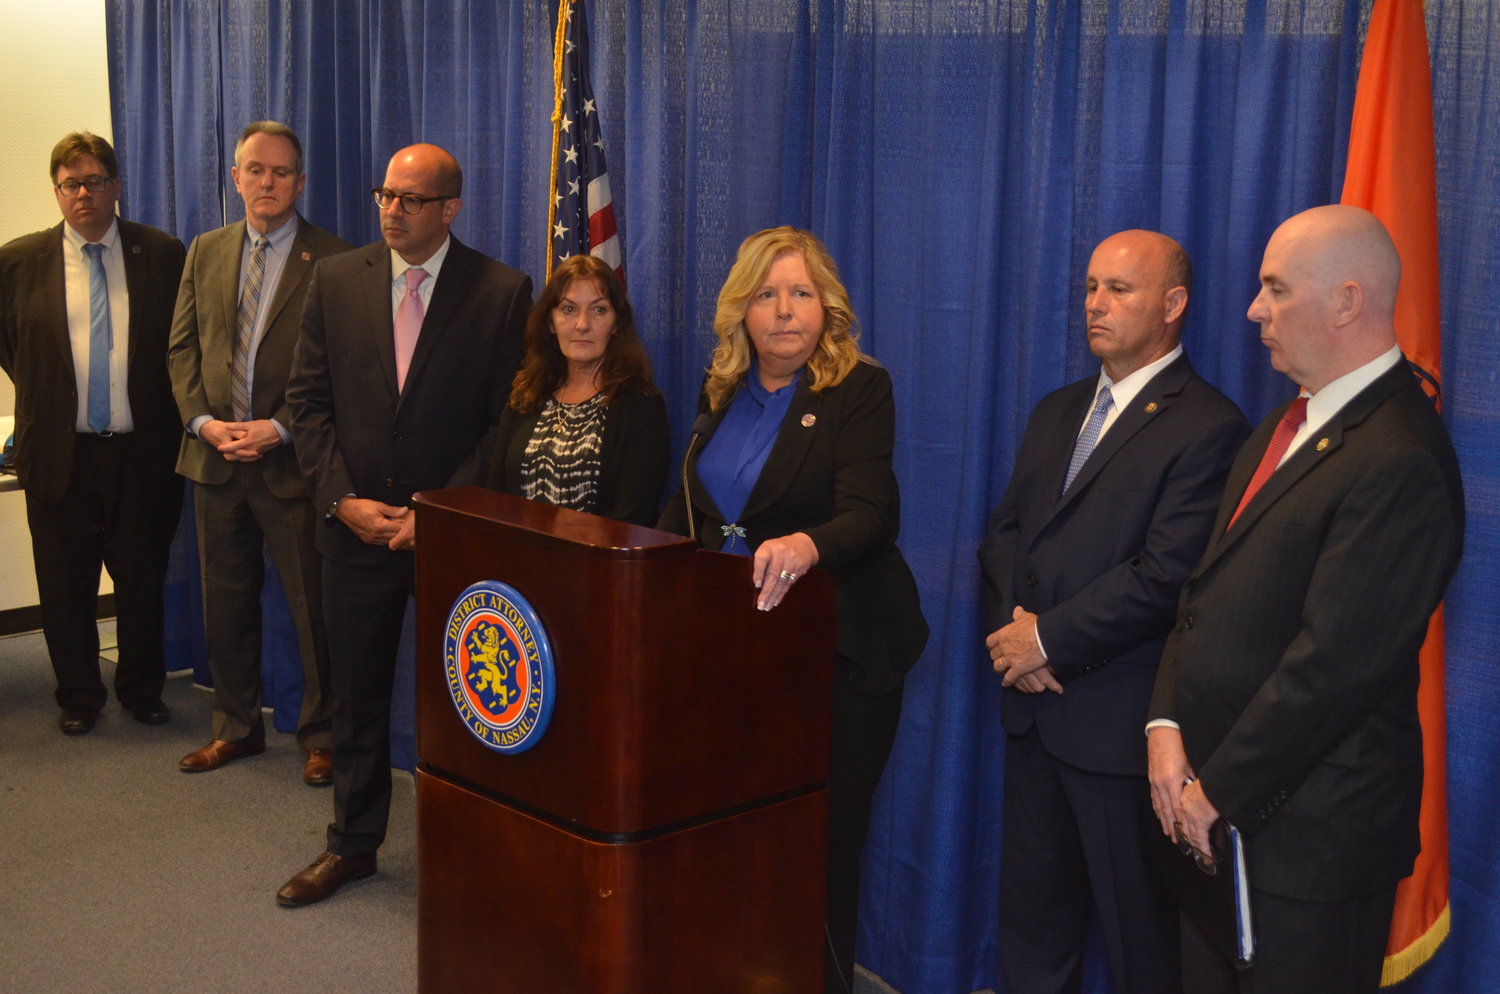 Darlene Altman, fourth from L., was 4 years old when her mother, Diane Cusick, 23, was allegedly murdered in her car at the Green Acres parking lot on February 15, 1968. Nassau County district attorney, Anne Donnelly, hosted a press briefing following the arraignment proceedings.